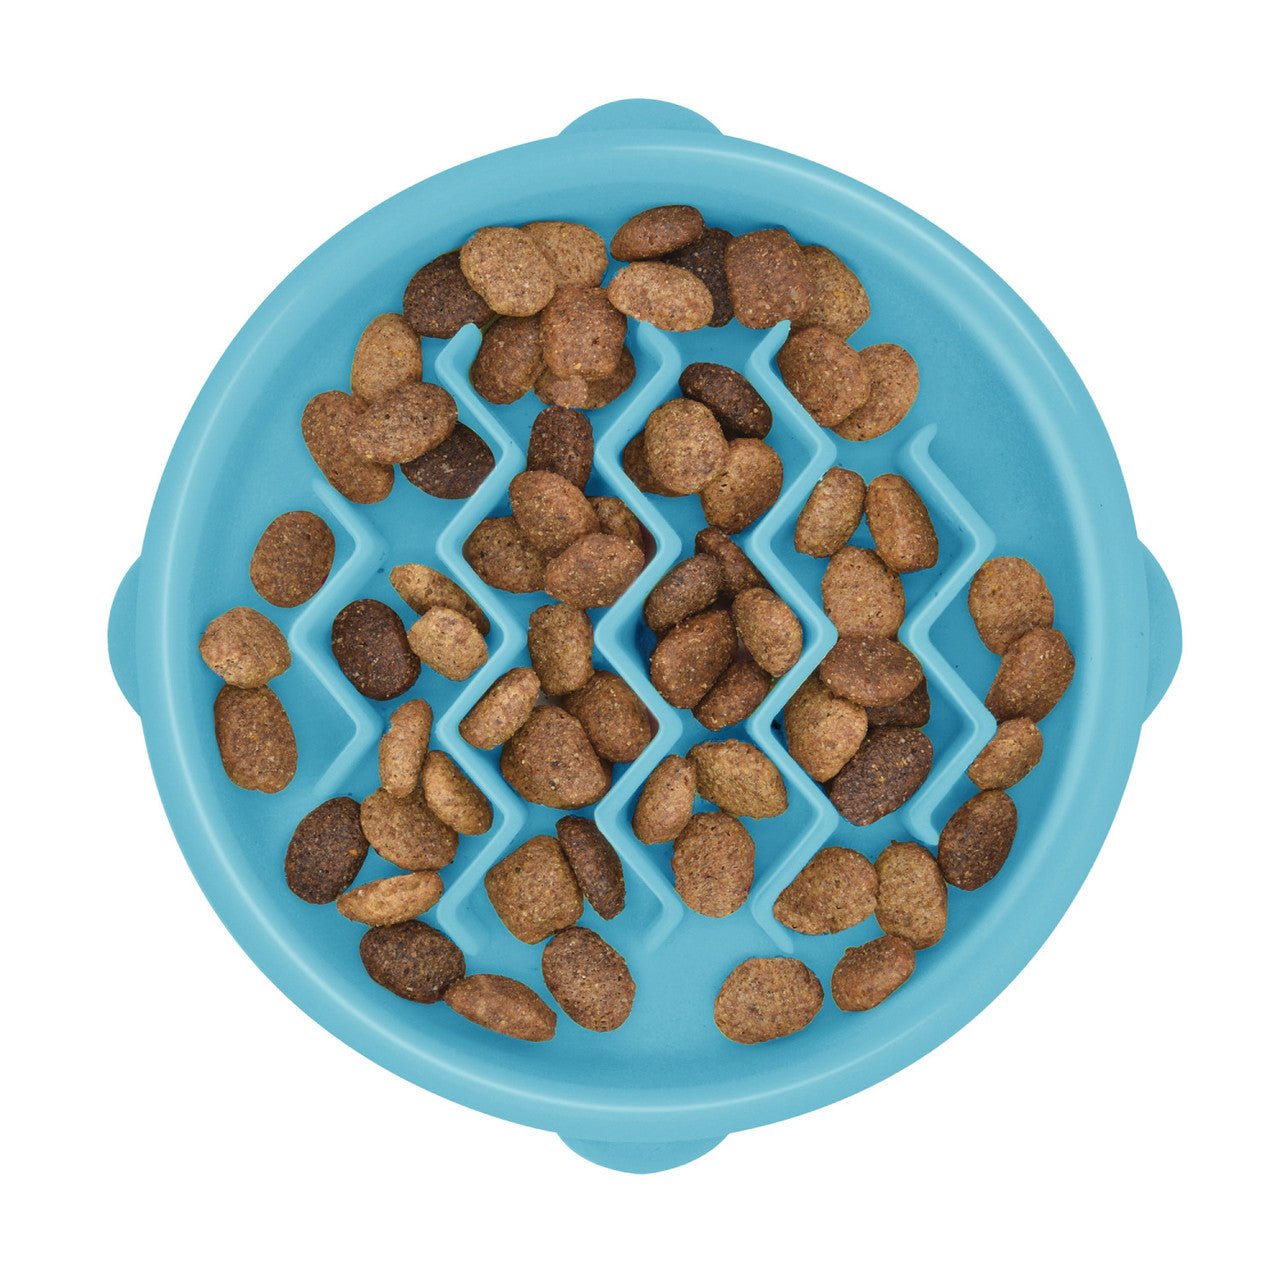 Kitty Slow Feeder - Blue - Wiggles & Whiskers Pet SuppliesAnipet Animal Supplies